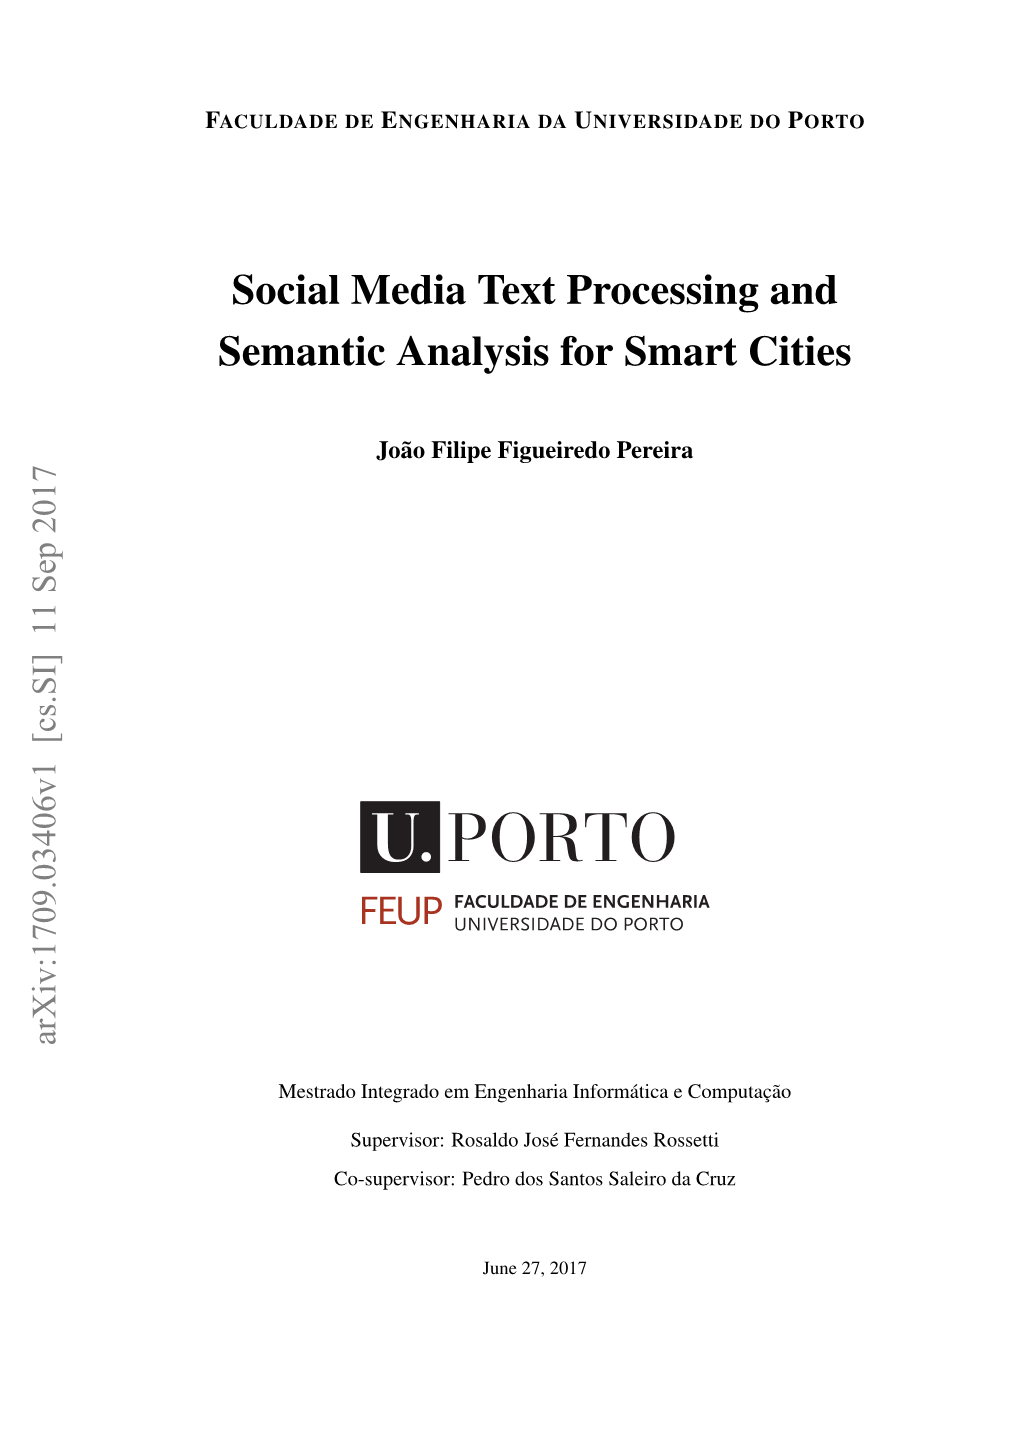 Social Media Text Processing and Semantic Analysis for Smart Cities